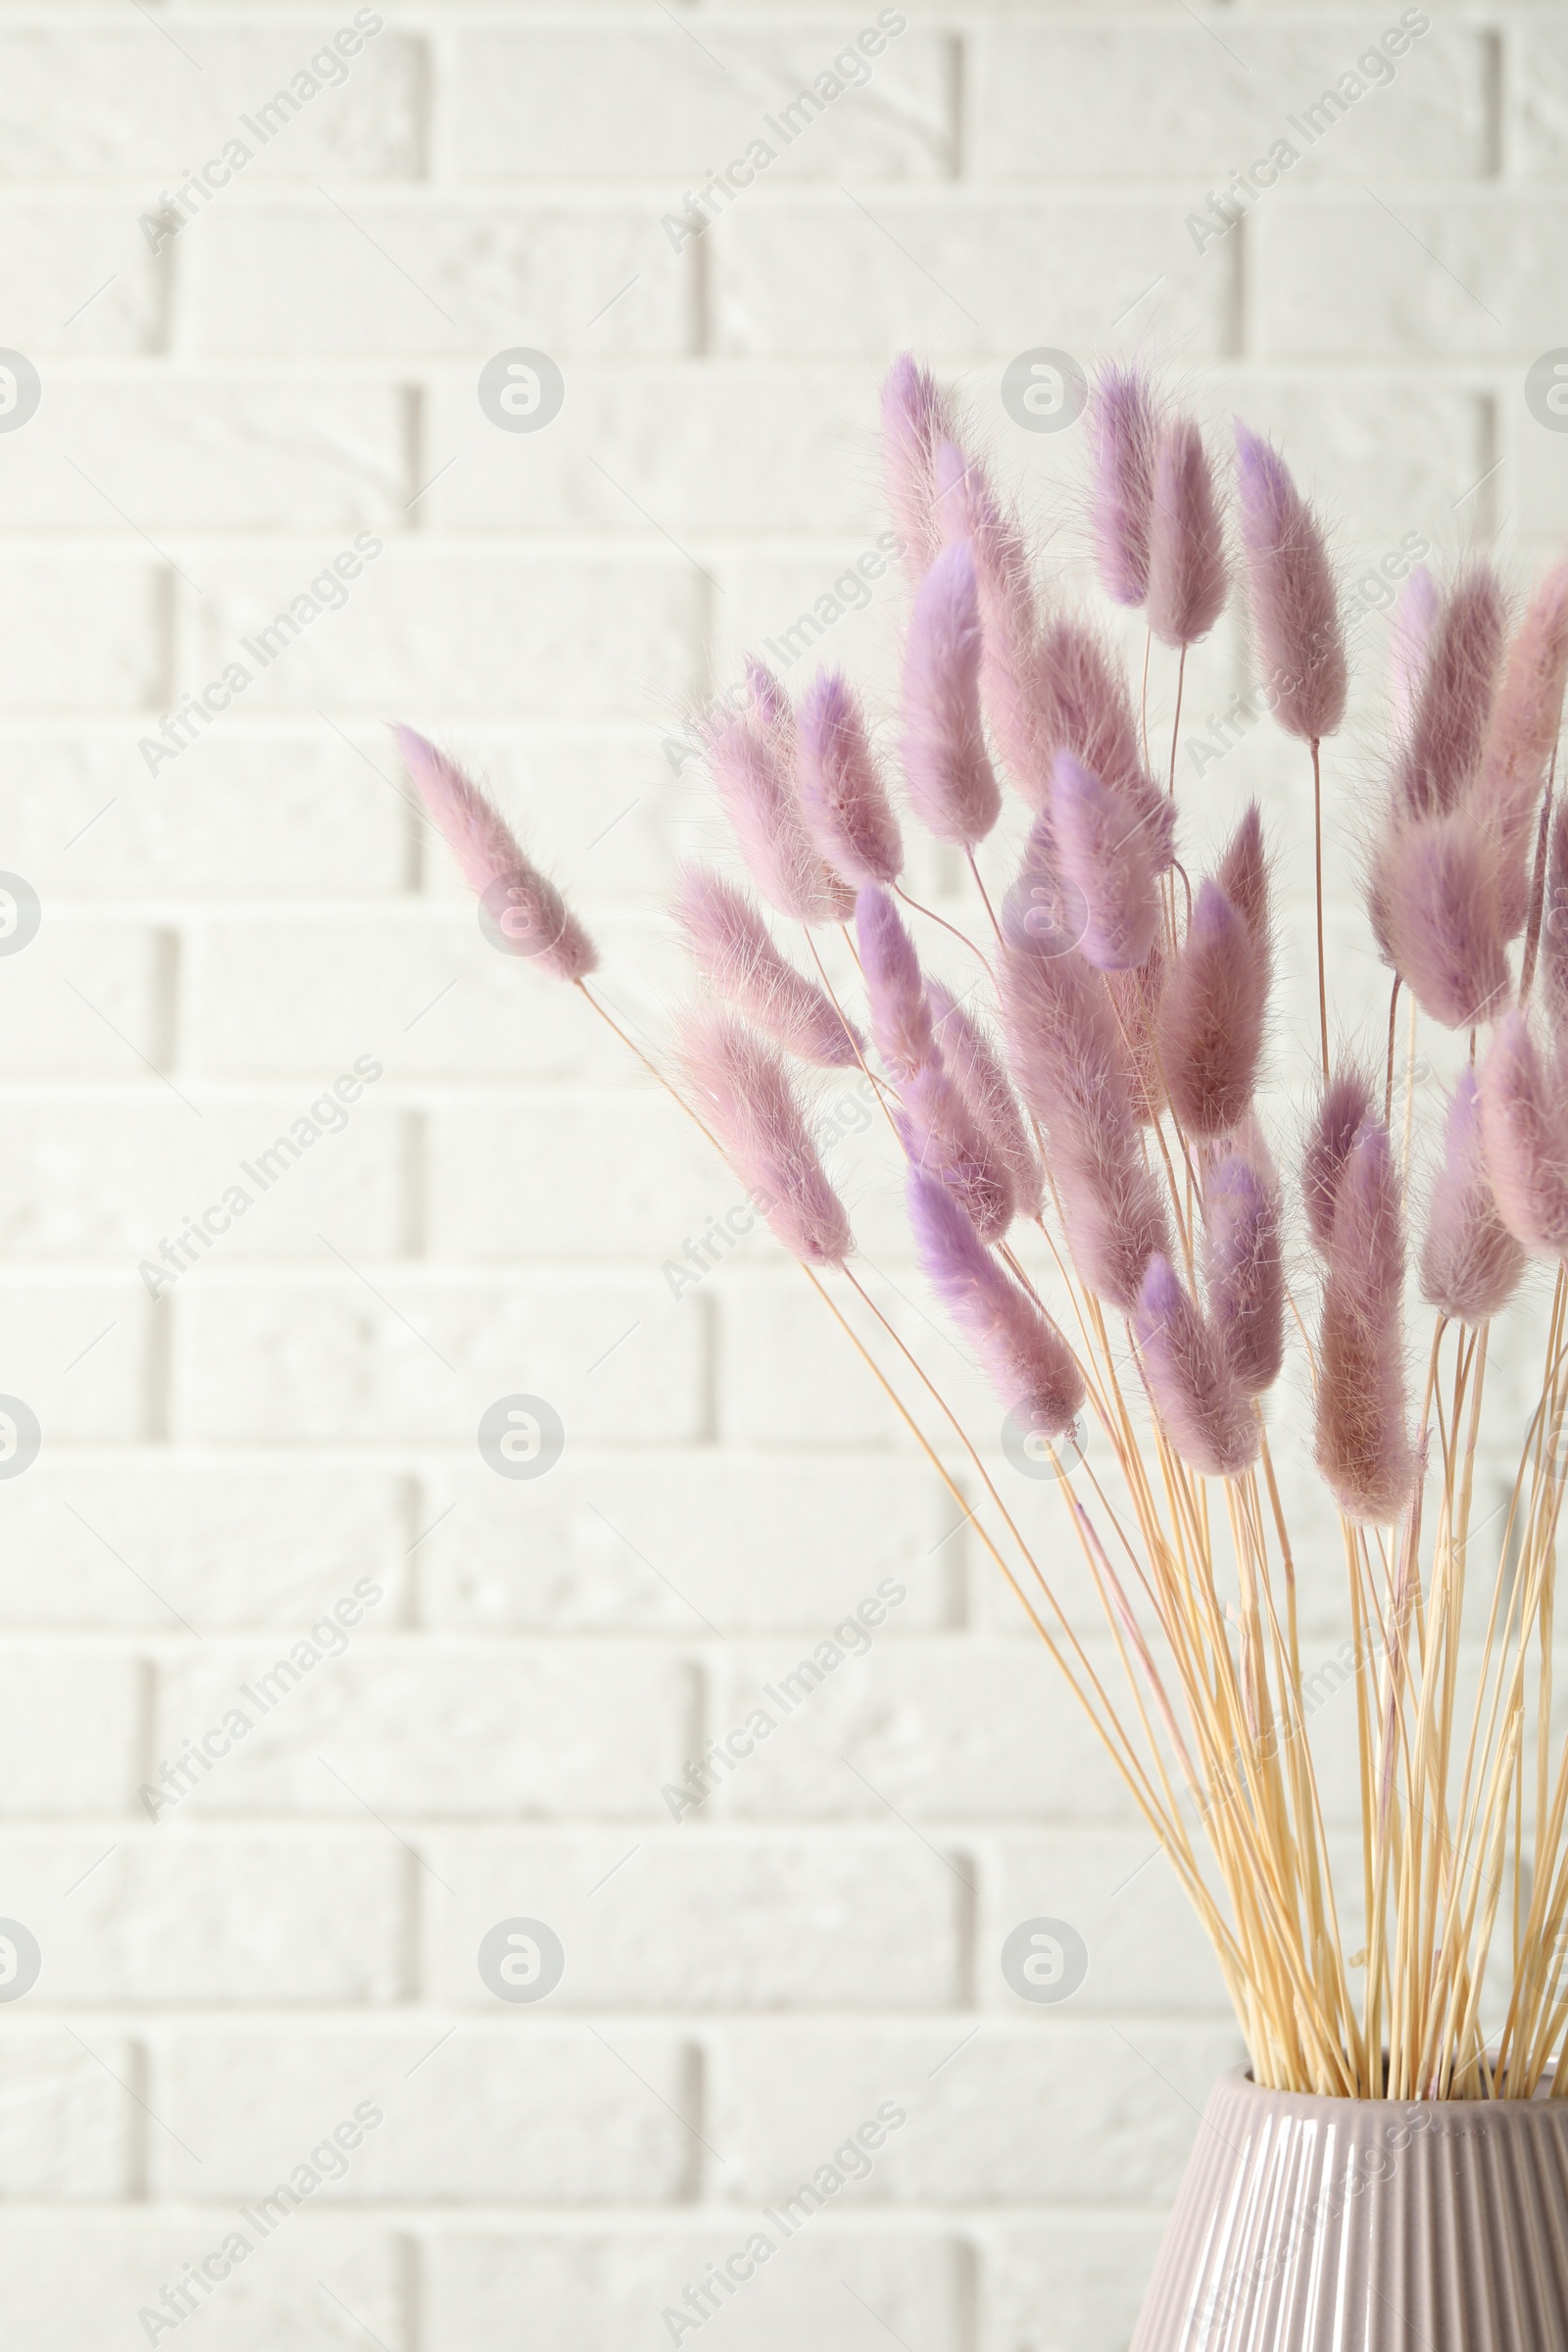 Photo of Dried flowers in vase against white brick wall